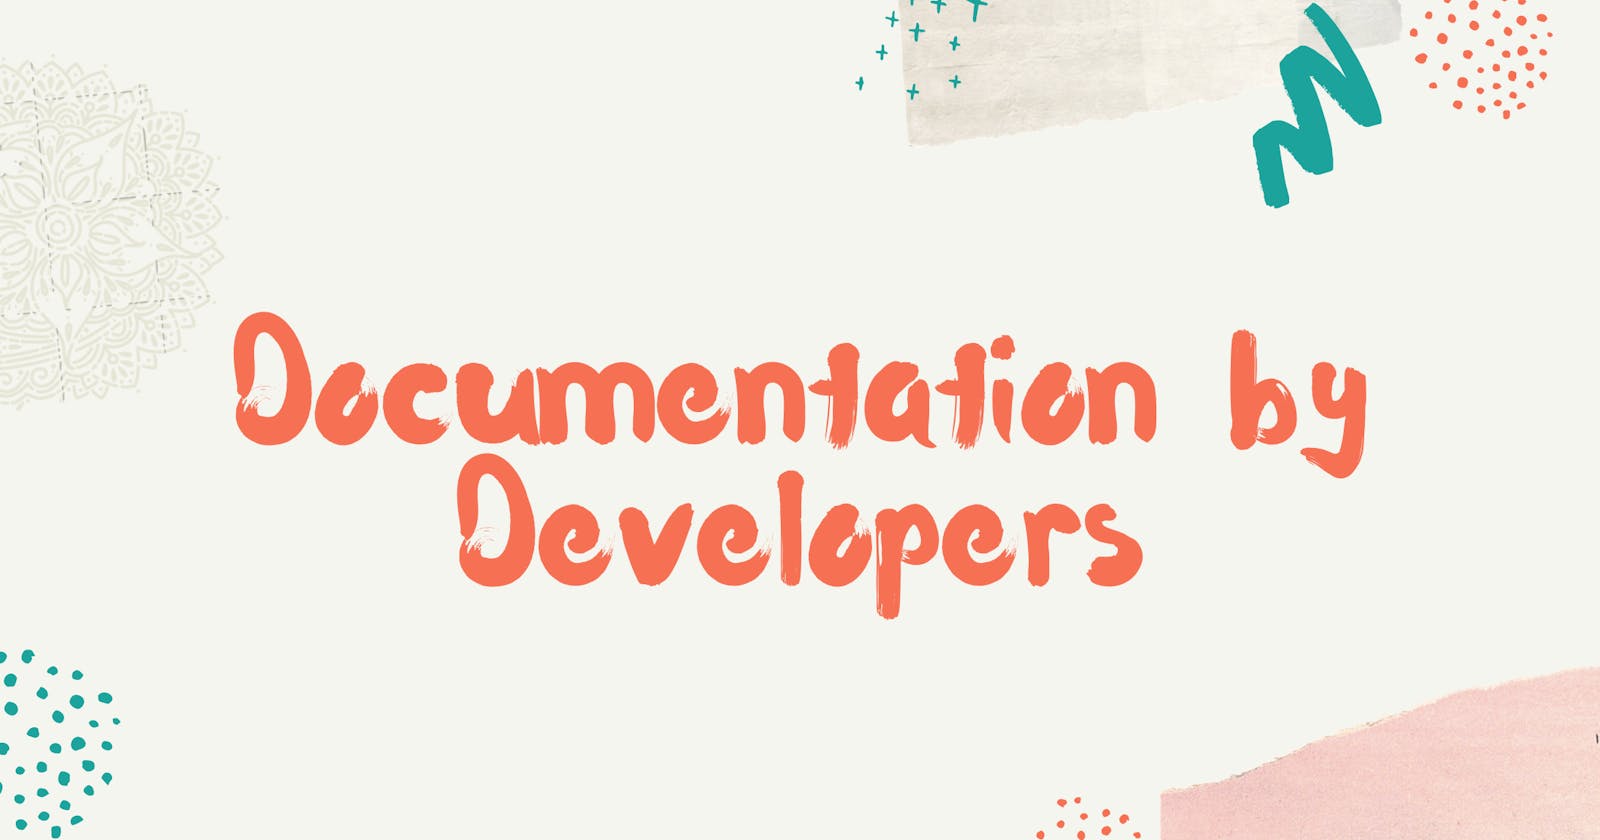 Documentation by Developers